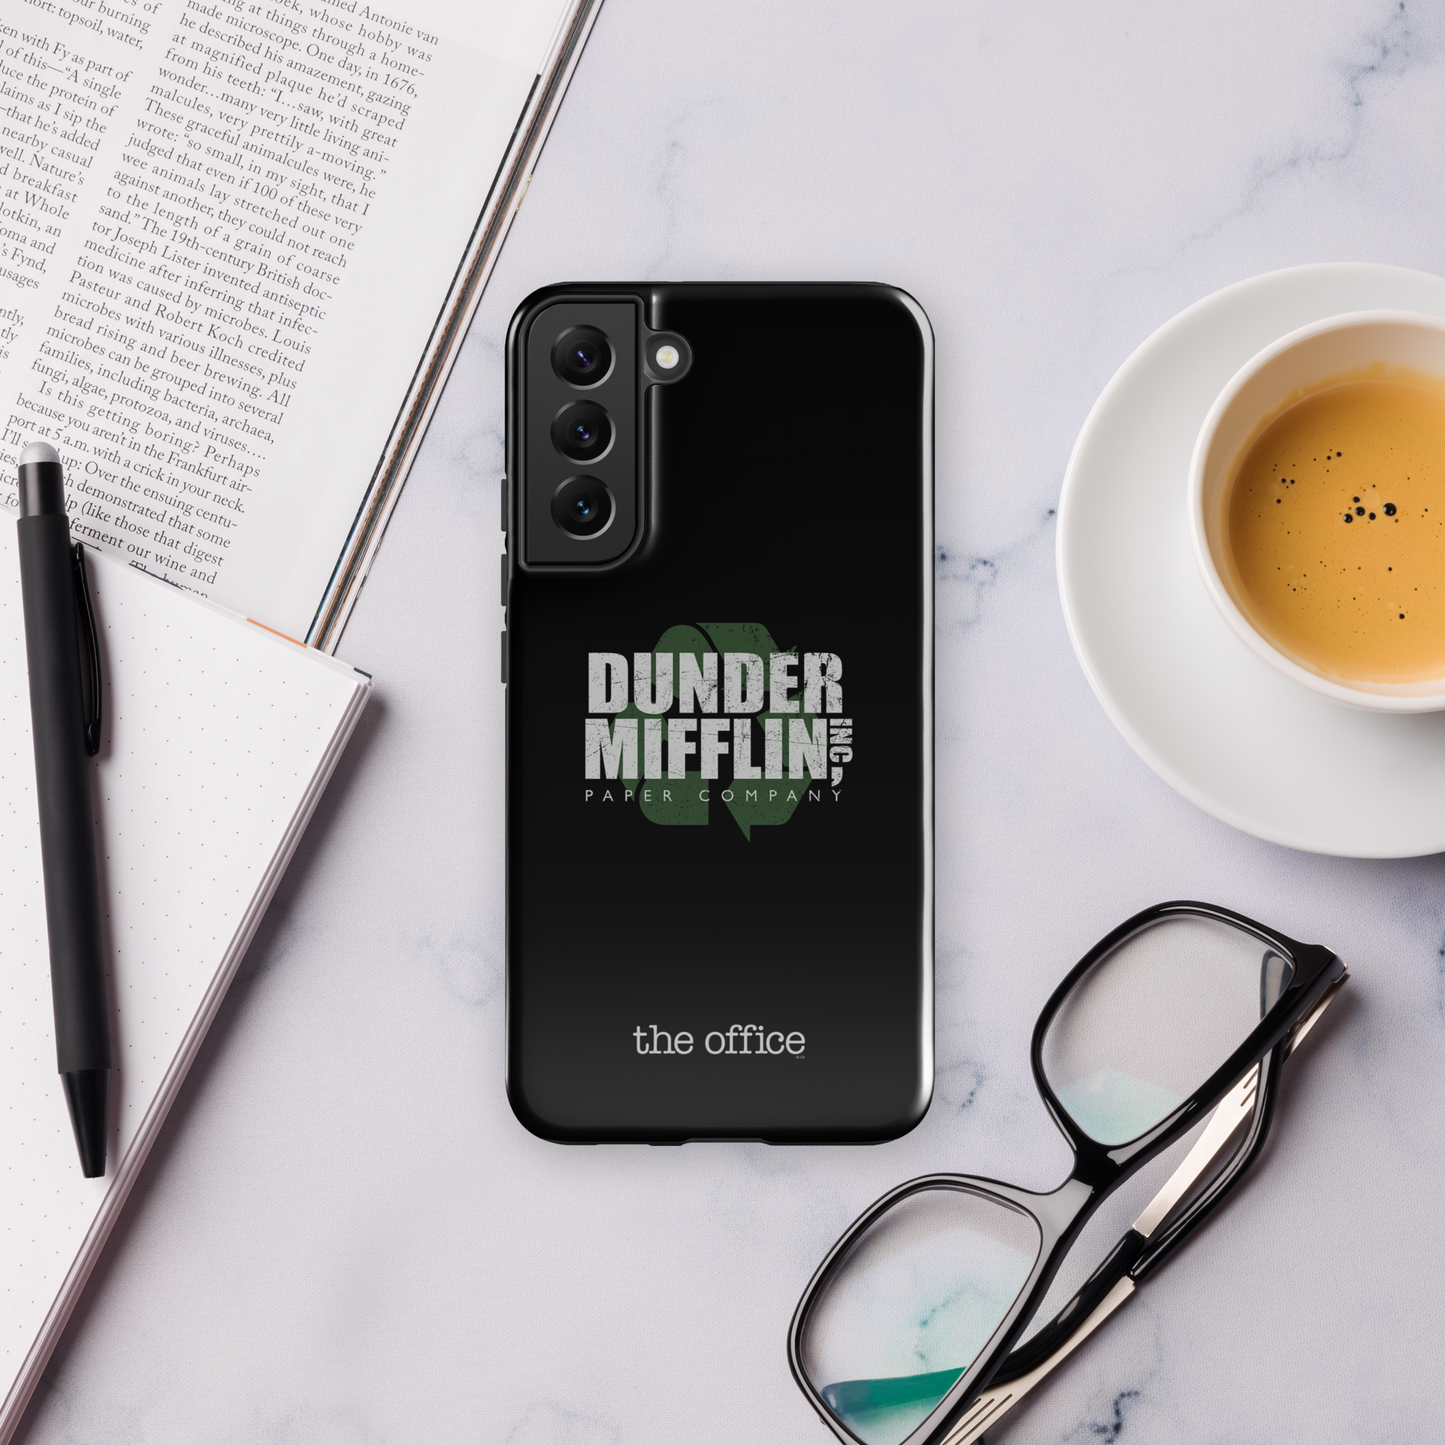 The Office Dunder Mifflin Recycle Tough Phone Case - Samsung